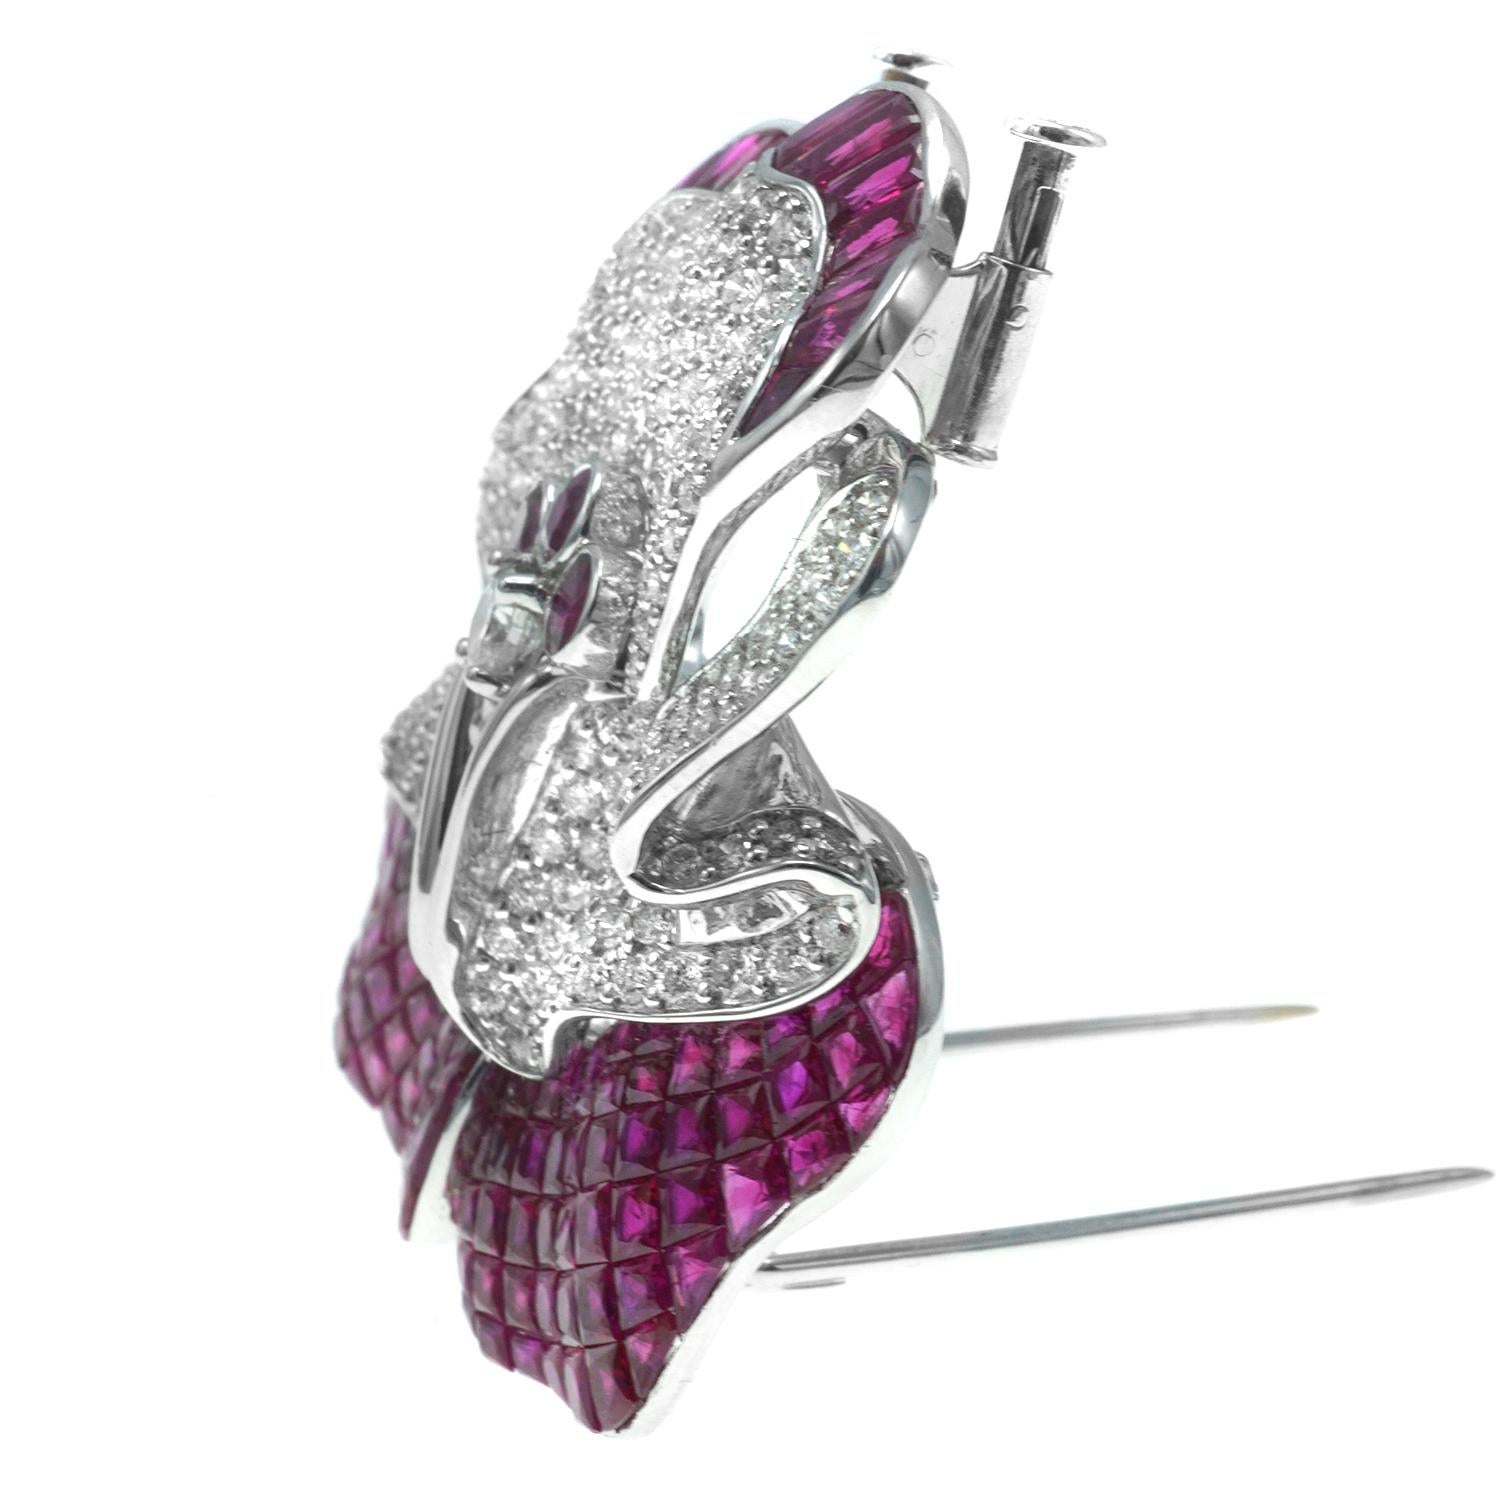 Crafted in 18 karat white gold this brooch features invisibly set fine rubies and round cut diamonds.  Dimensions L 1 3/4